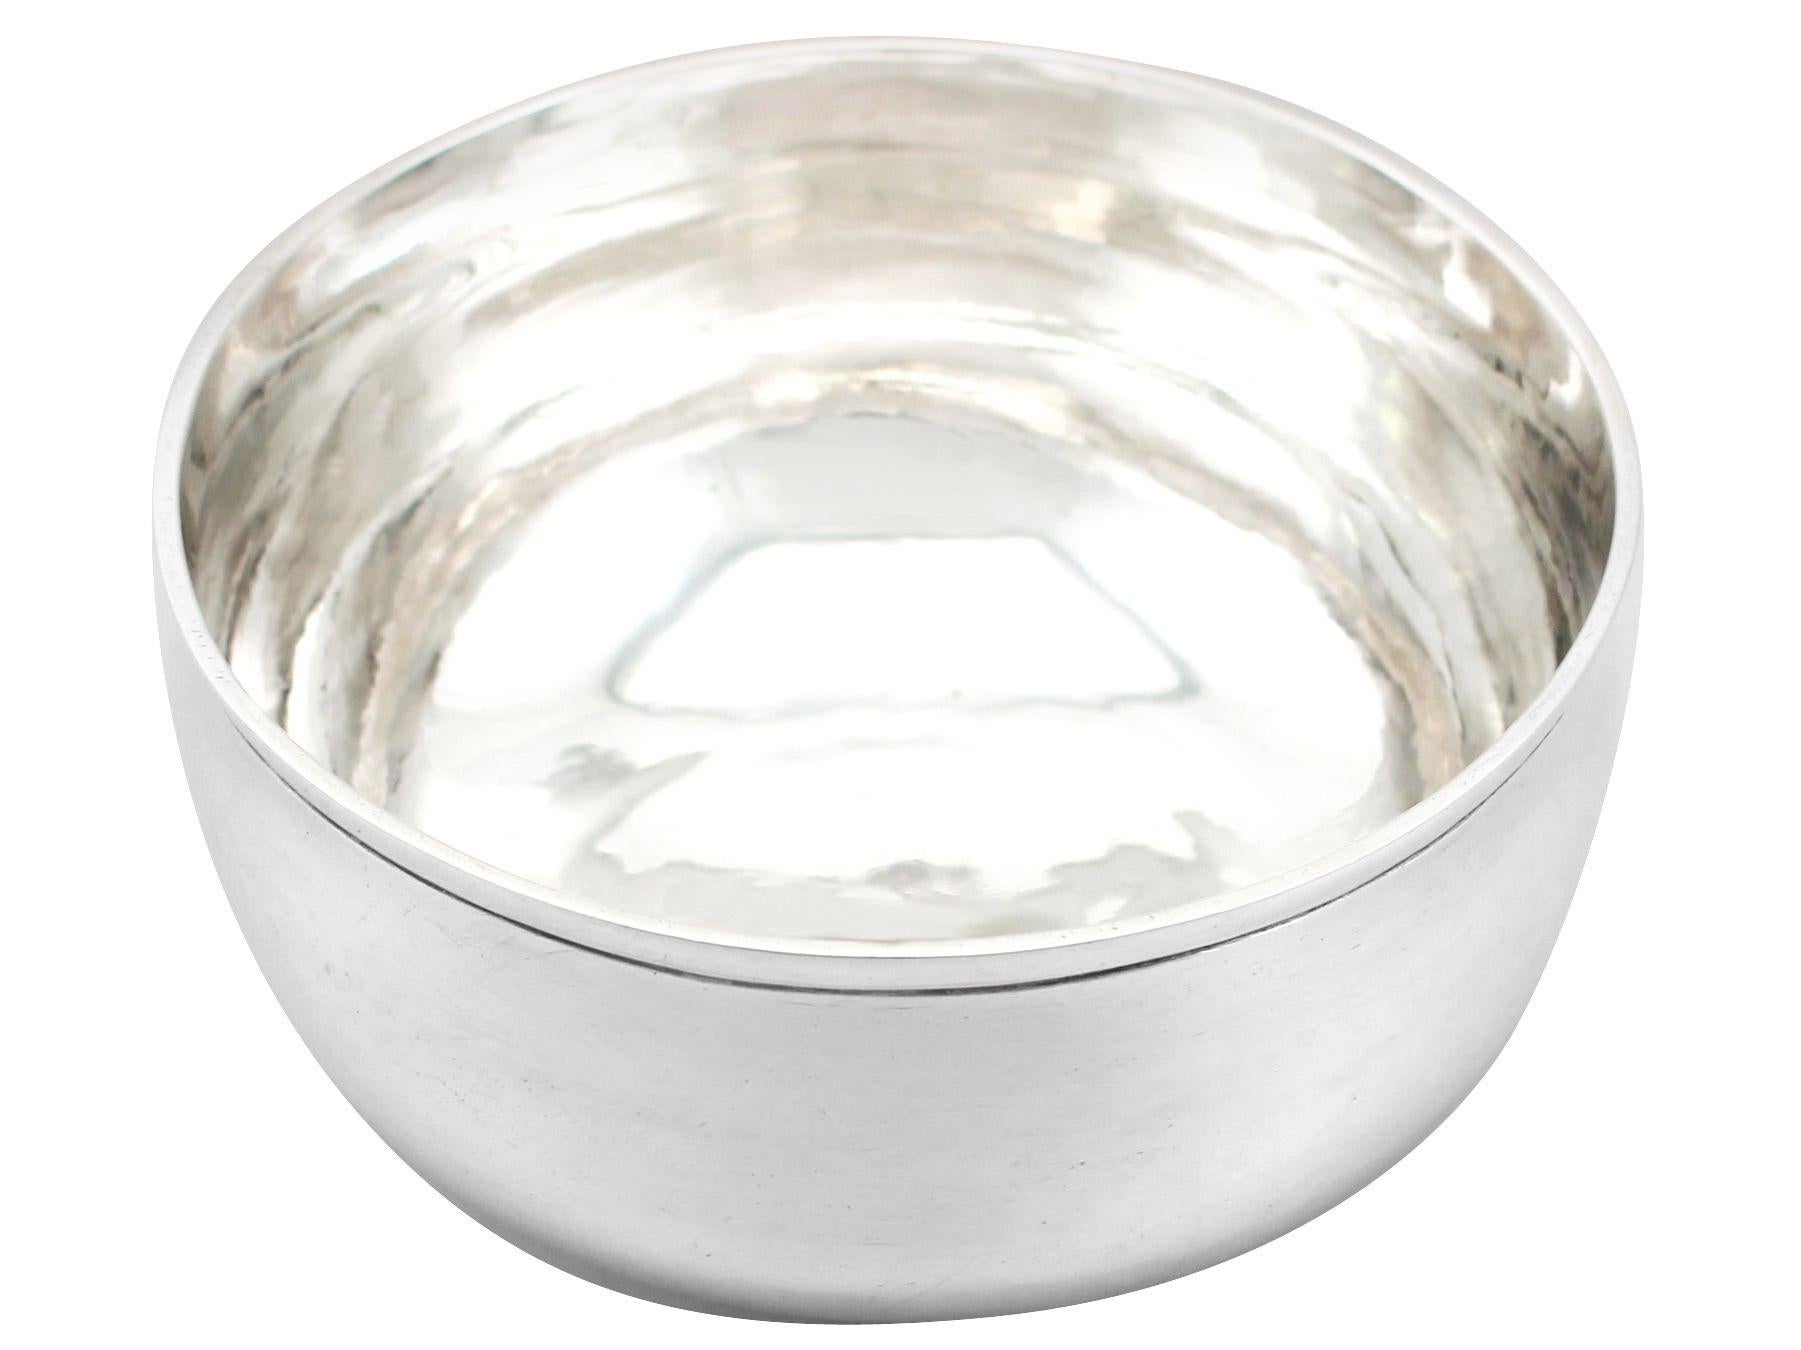 An exceptional, fine and impressive antique George II Newcastle sterling silver sugar bowl; an addition to our diverse silver Georgian teaware collection.

This exceptional antique George II Newcastle sterling silver bowl has a plain circular